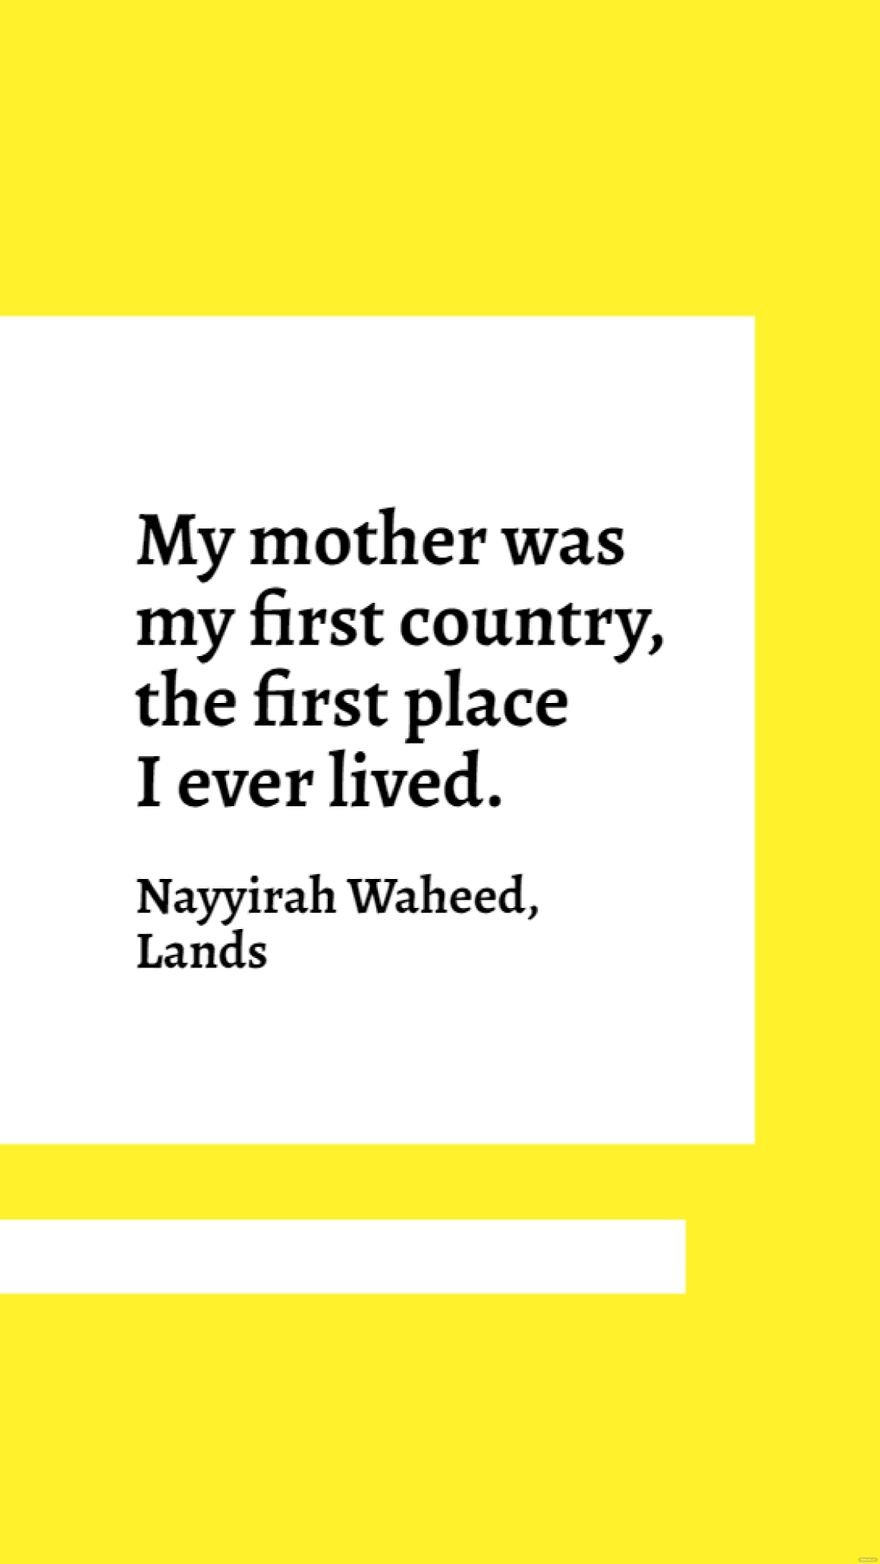 Nayyirah Waheed, Lands - My mother was my first country, the first place I ever lived. in JPG